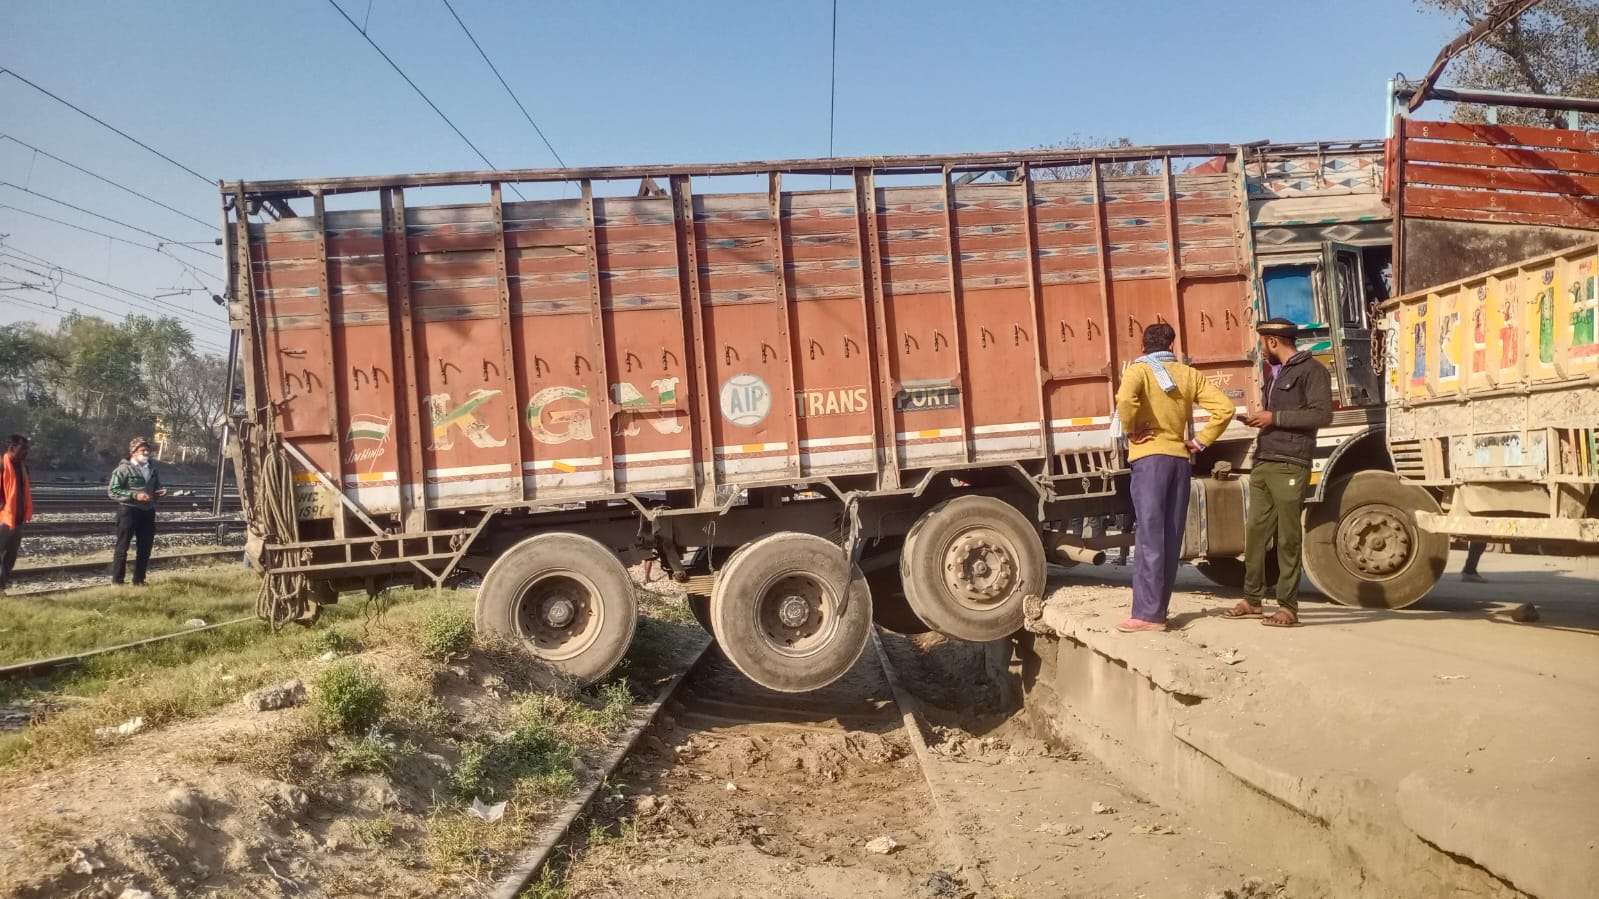  Truck fell on the track of warehouse platform